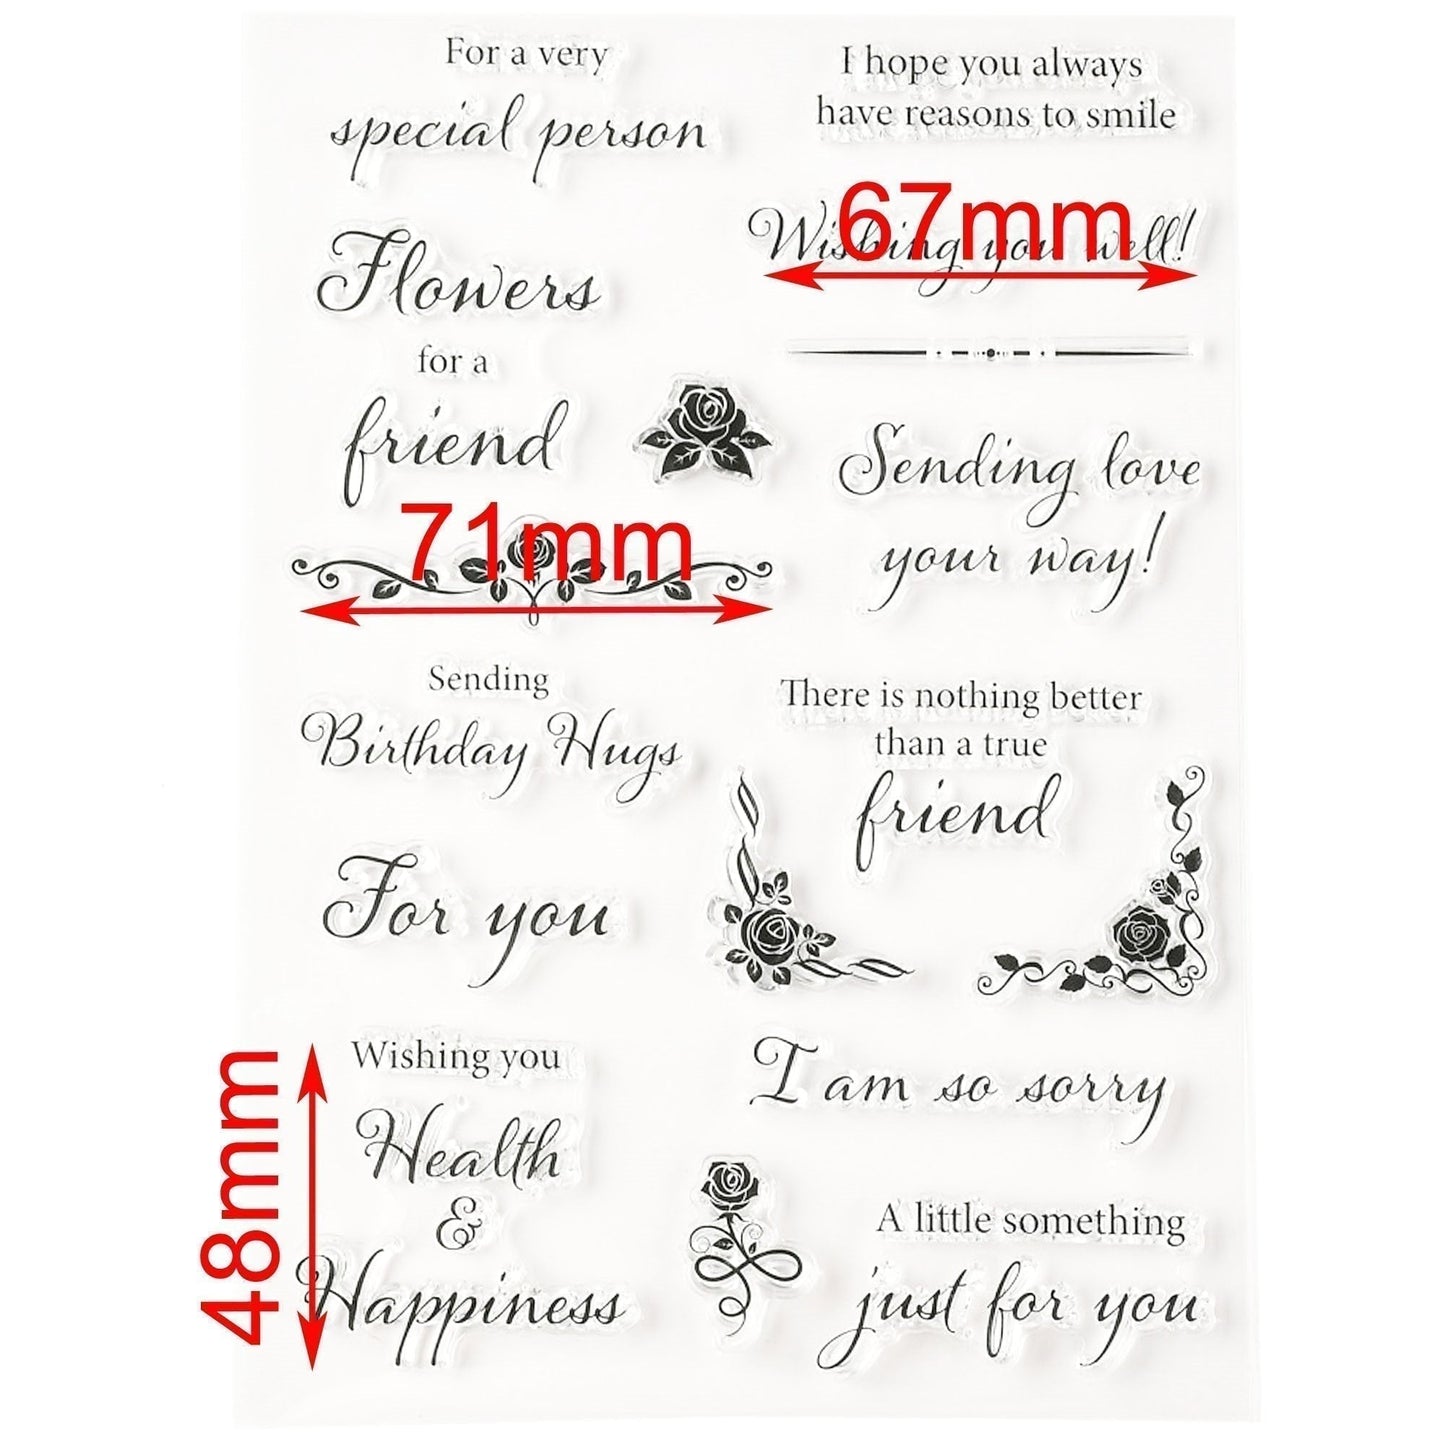 Special Person Message Clear Stamp Silicone Rubber Scrapbooking Card Making